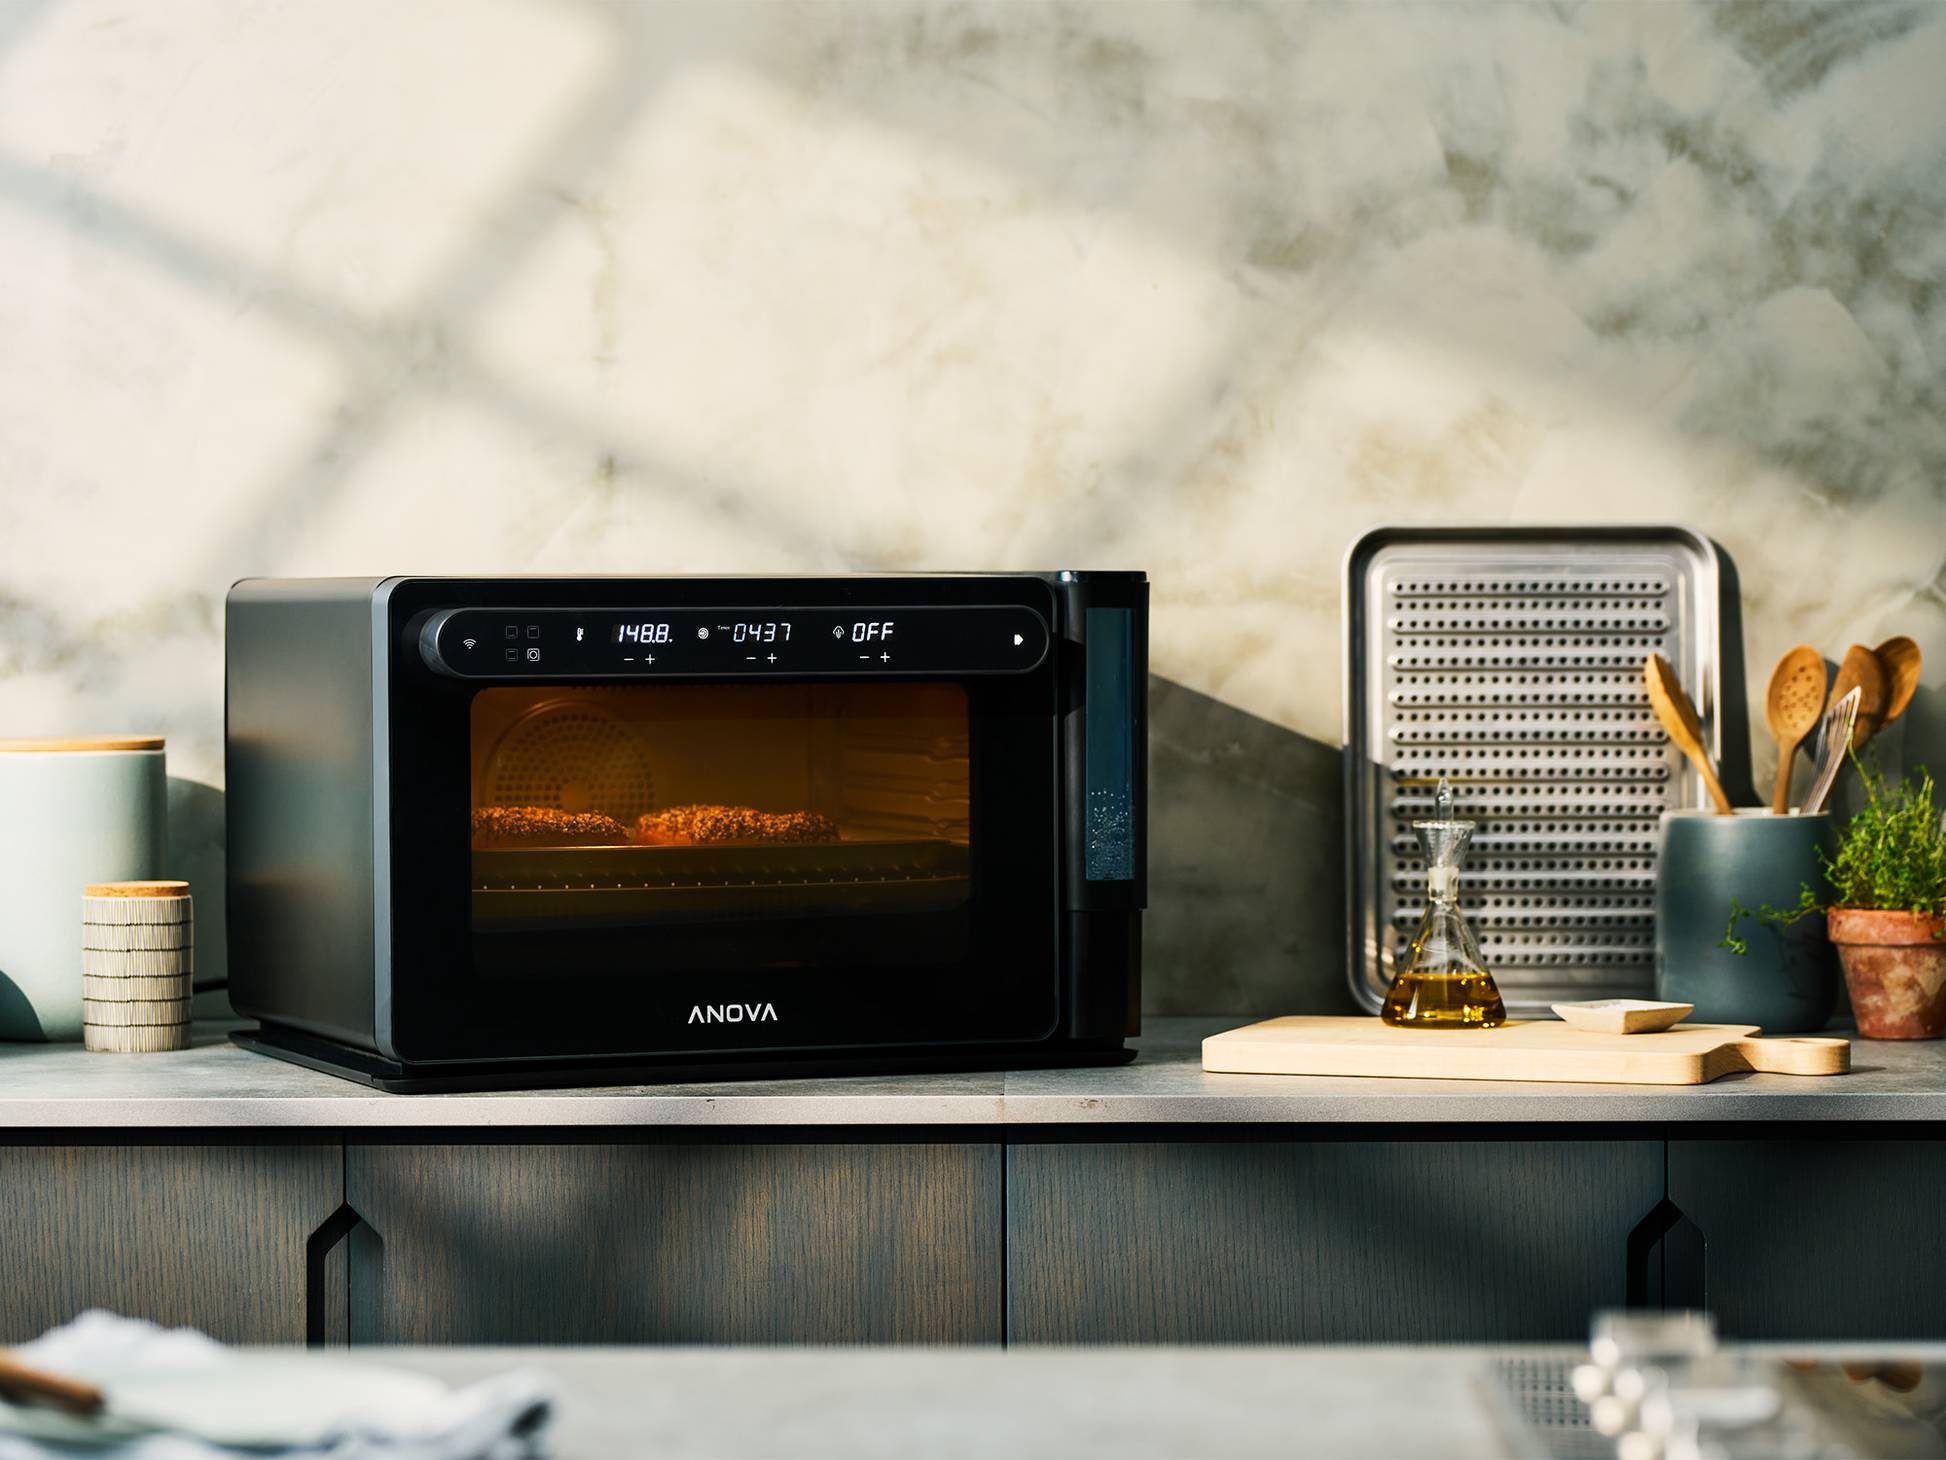 Designing a kitchen with a steam oven? Here's what you need to